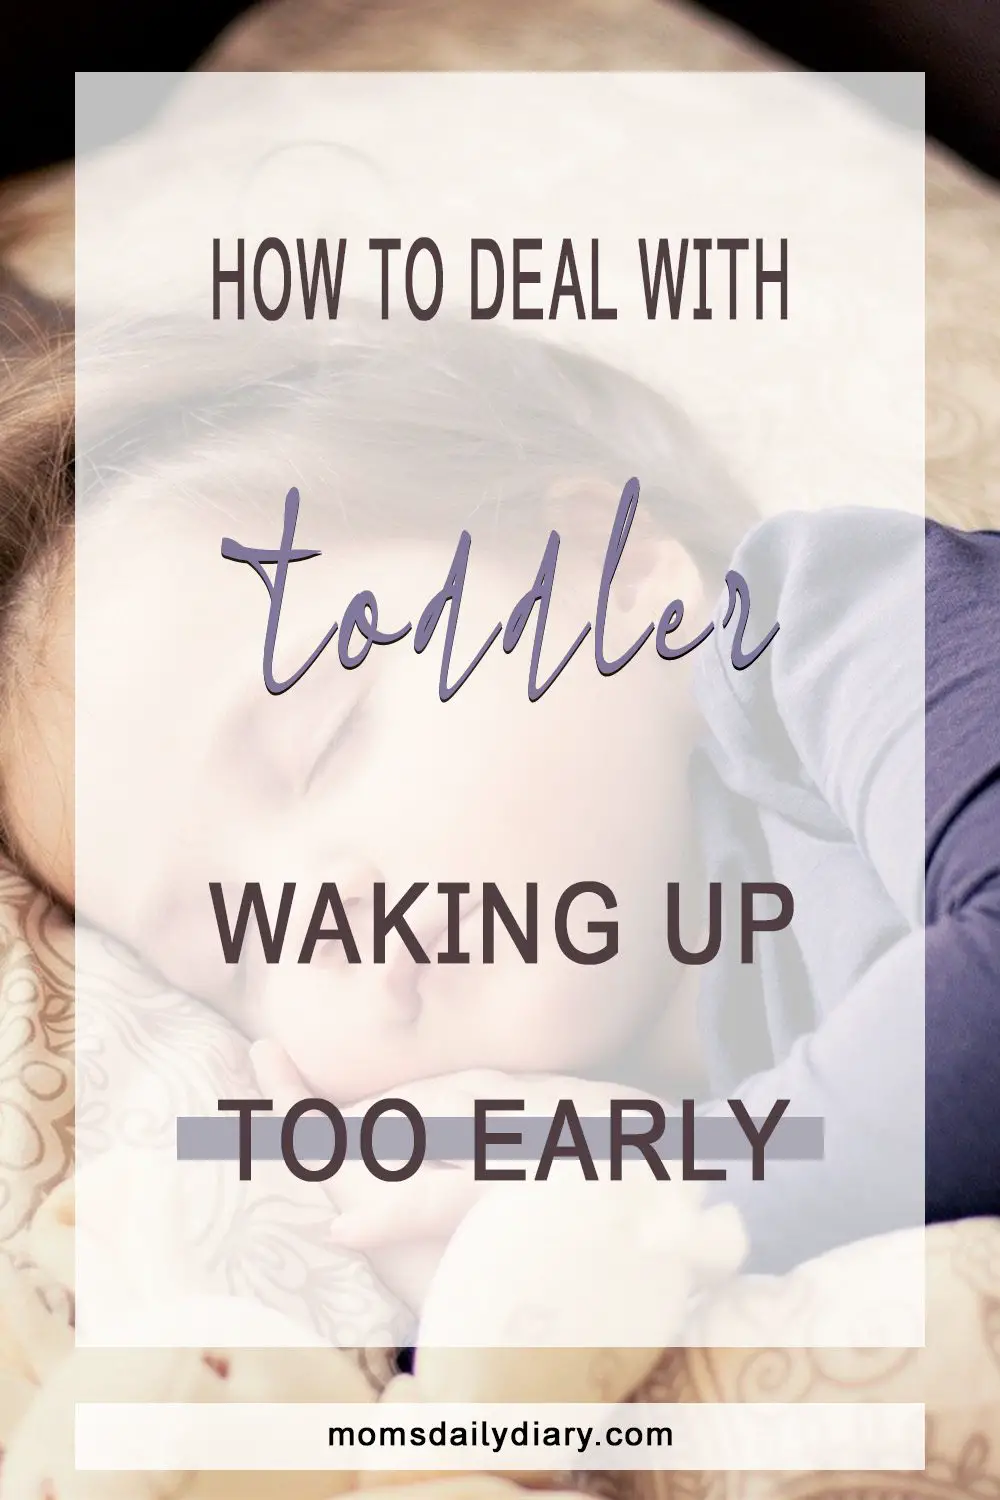 Has your toddler suddenly started waking up at 5AM? It's a nightmare, I know. Fortunately, you can fix it by following these few simple tips.